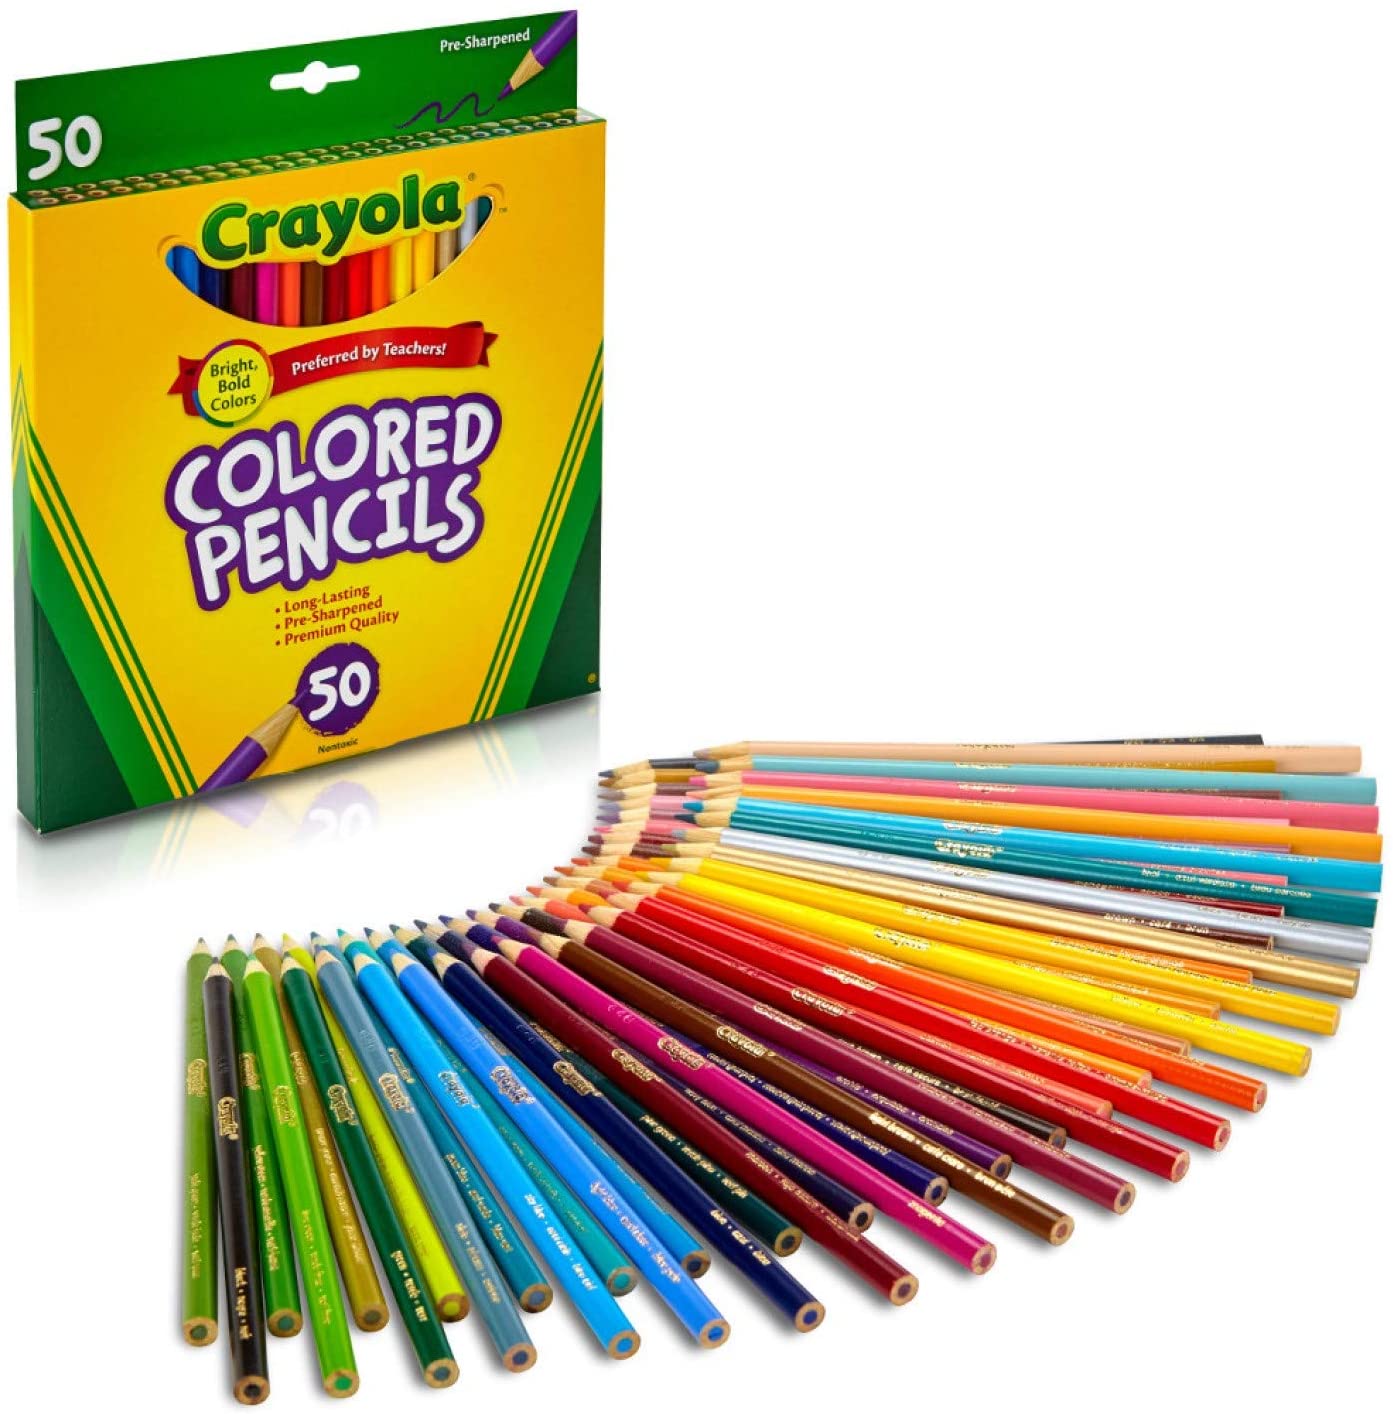 Crayola Colored Pencils, Assorted Colors, 50 Count | Amazon Stocking Stuffers | Stocking stuffers For Adults | stocking stuffers for men | mens stocking stuffers | Stocking stuffers for her | Stocking stuffers for guys | Cheap stocking stuffers | Best stocking stuffers | Stocking stuffers for wife | stocking stuffer gifts | Best stocking stuffers